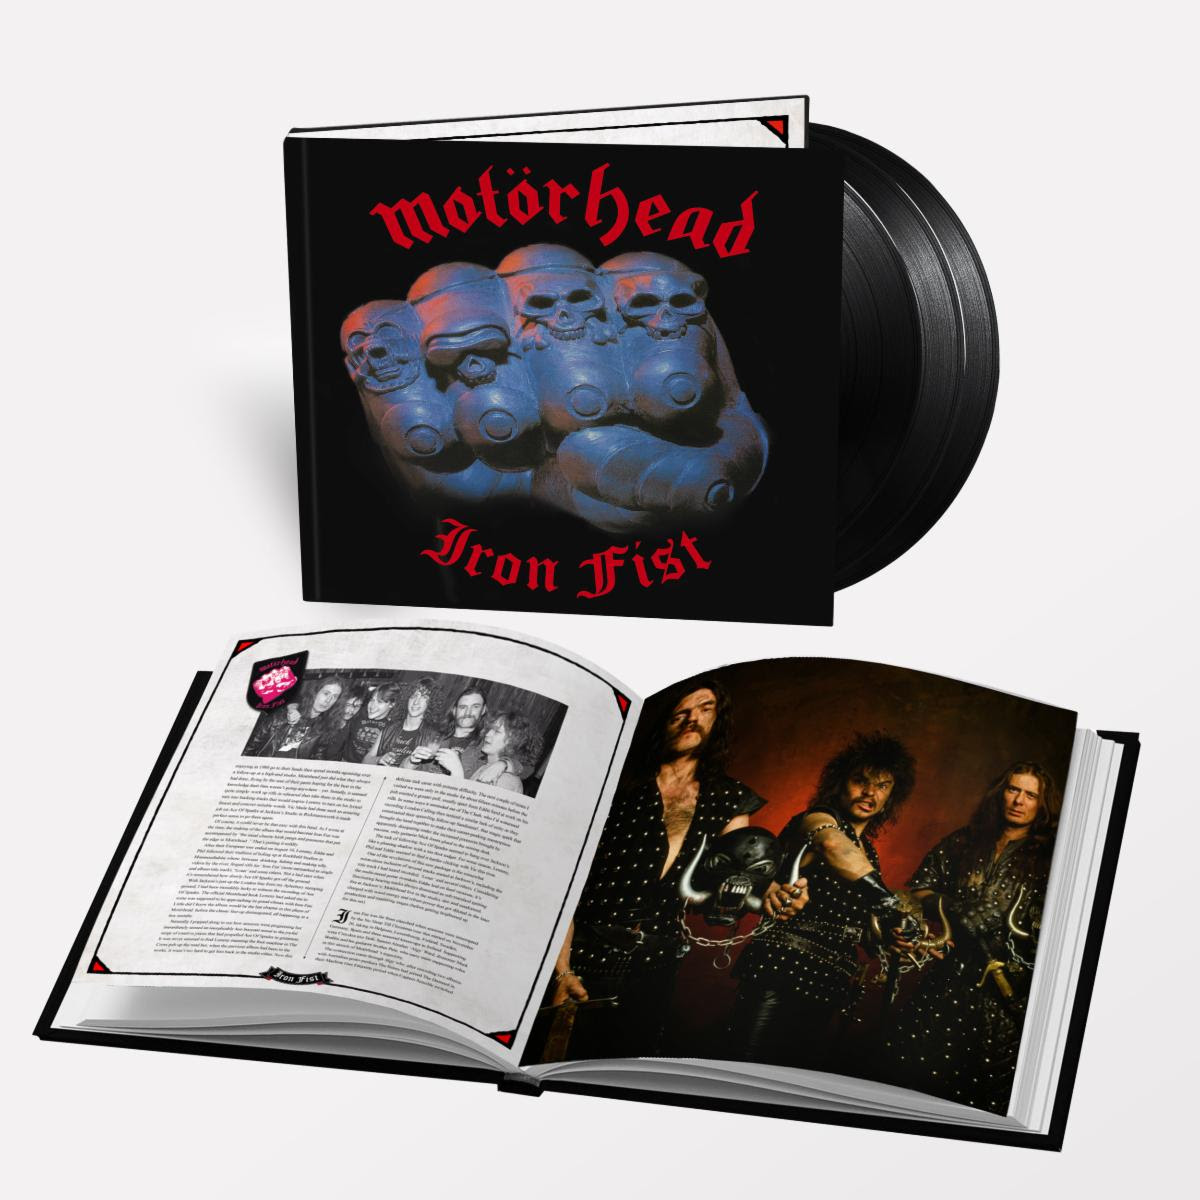 SPECIAL 40th ANNIVERSARY EDITIONS OF IRON FIST TO BE RELEASED ON 23rd SEPT 2022 PREORDERS & EXCLUSIVE MERCH BUNDLES HERE https://motorhead.lnk.to/ironfist40thPR